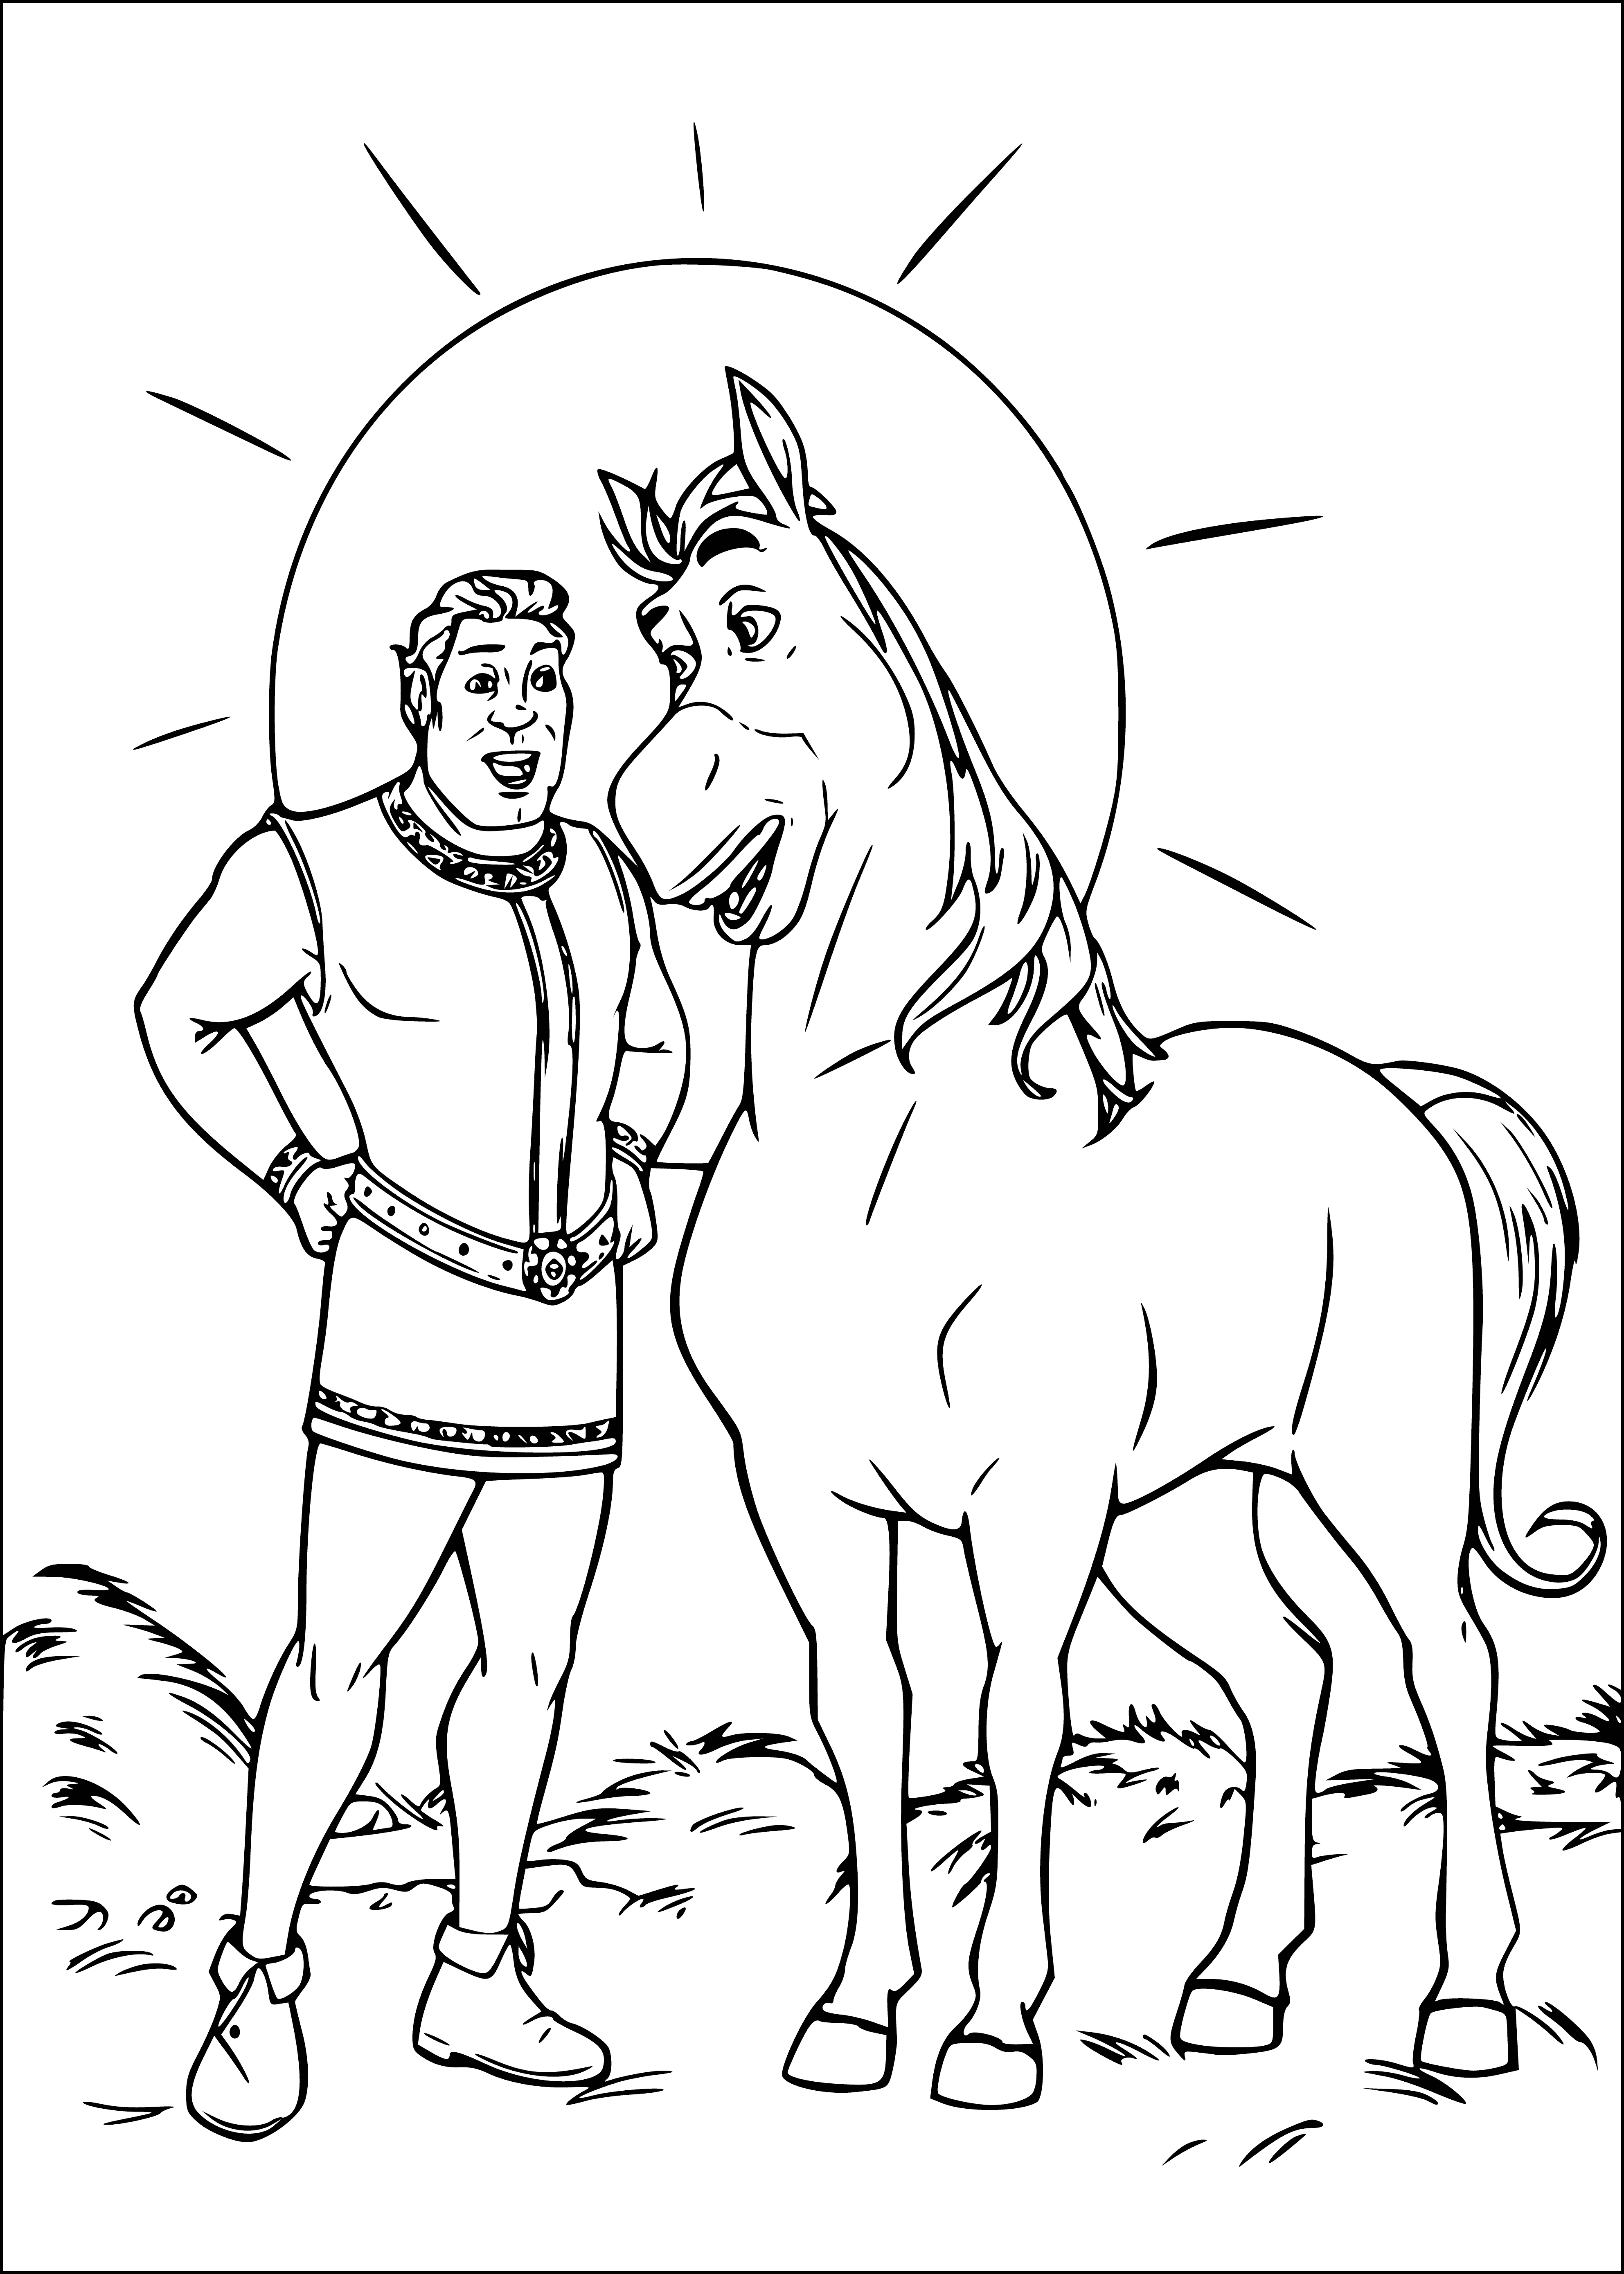 coloring page: Shrek stands in front of a castle with a donkey & cat at his sides, amid an orange sky w/ stars. He wears a purple vest & has his arms crossed.